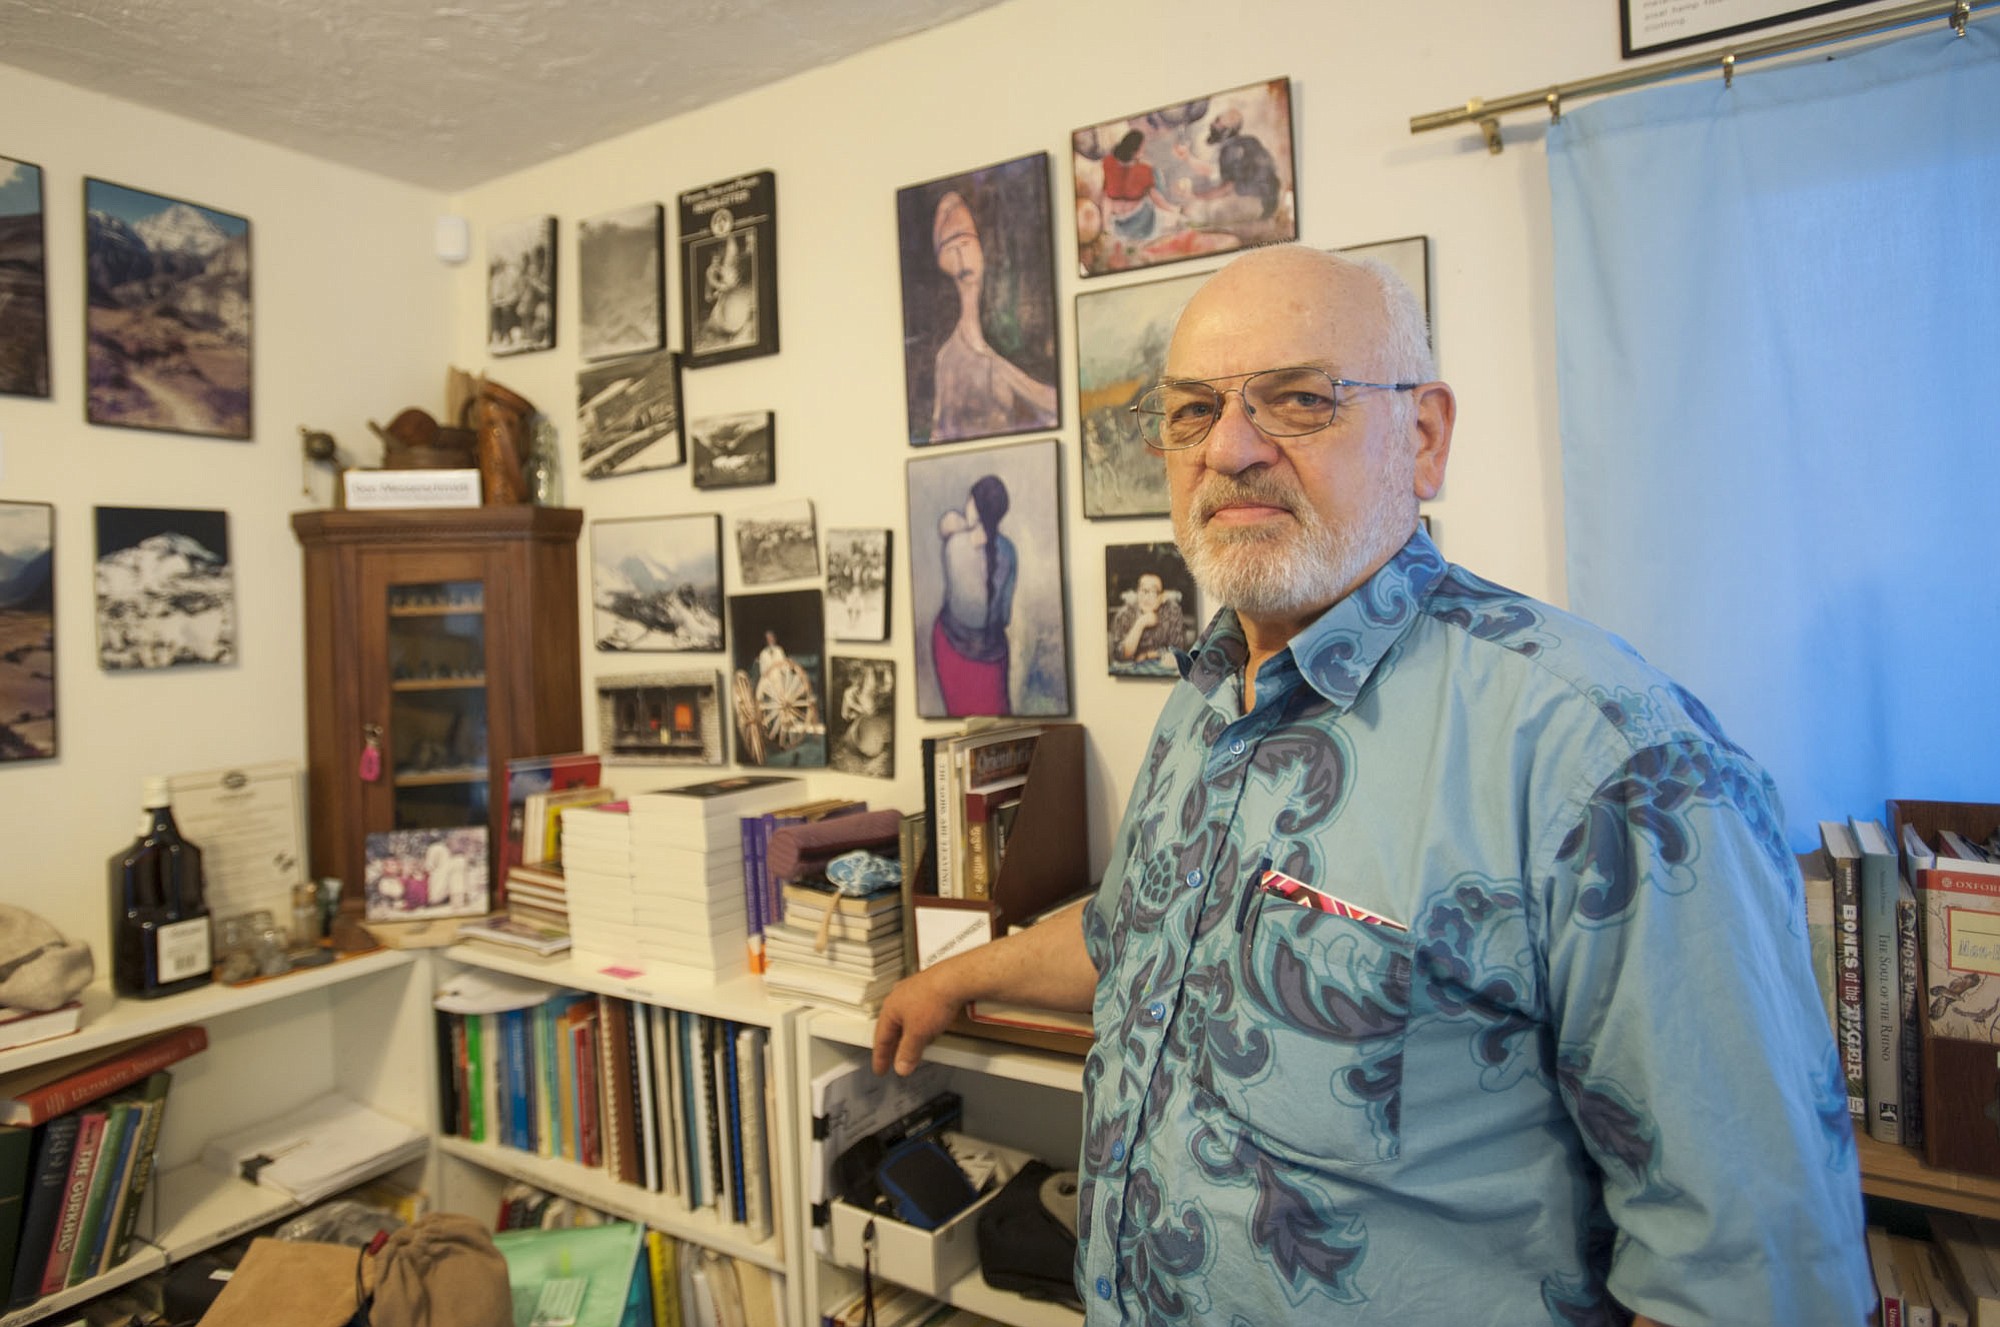 Don Messerschmidt's office is filled with books, keepsakes and artwork representing his connections with Nepal, which started in 1963 as a Peace Corps volunteer.